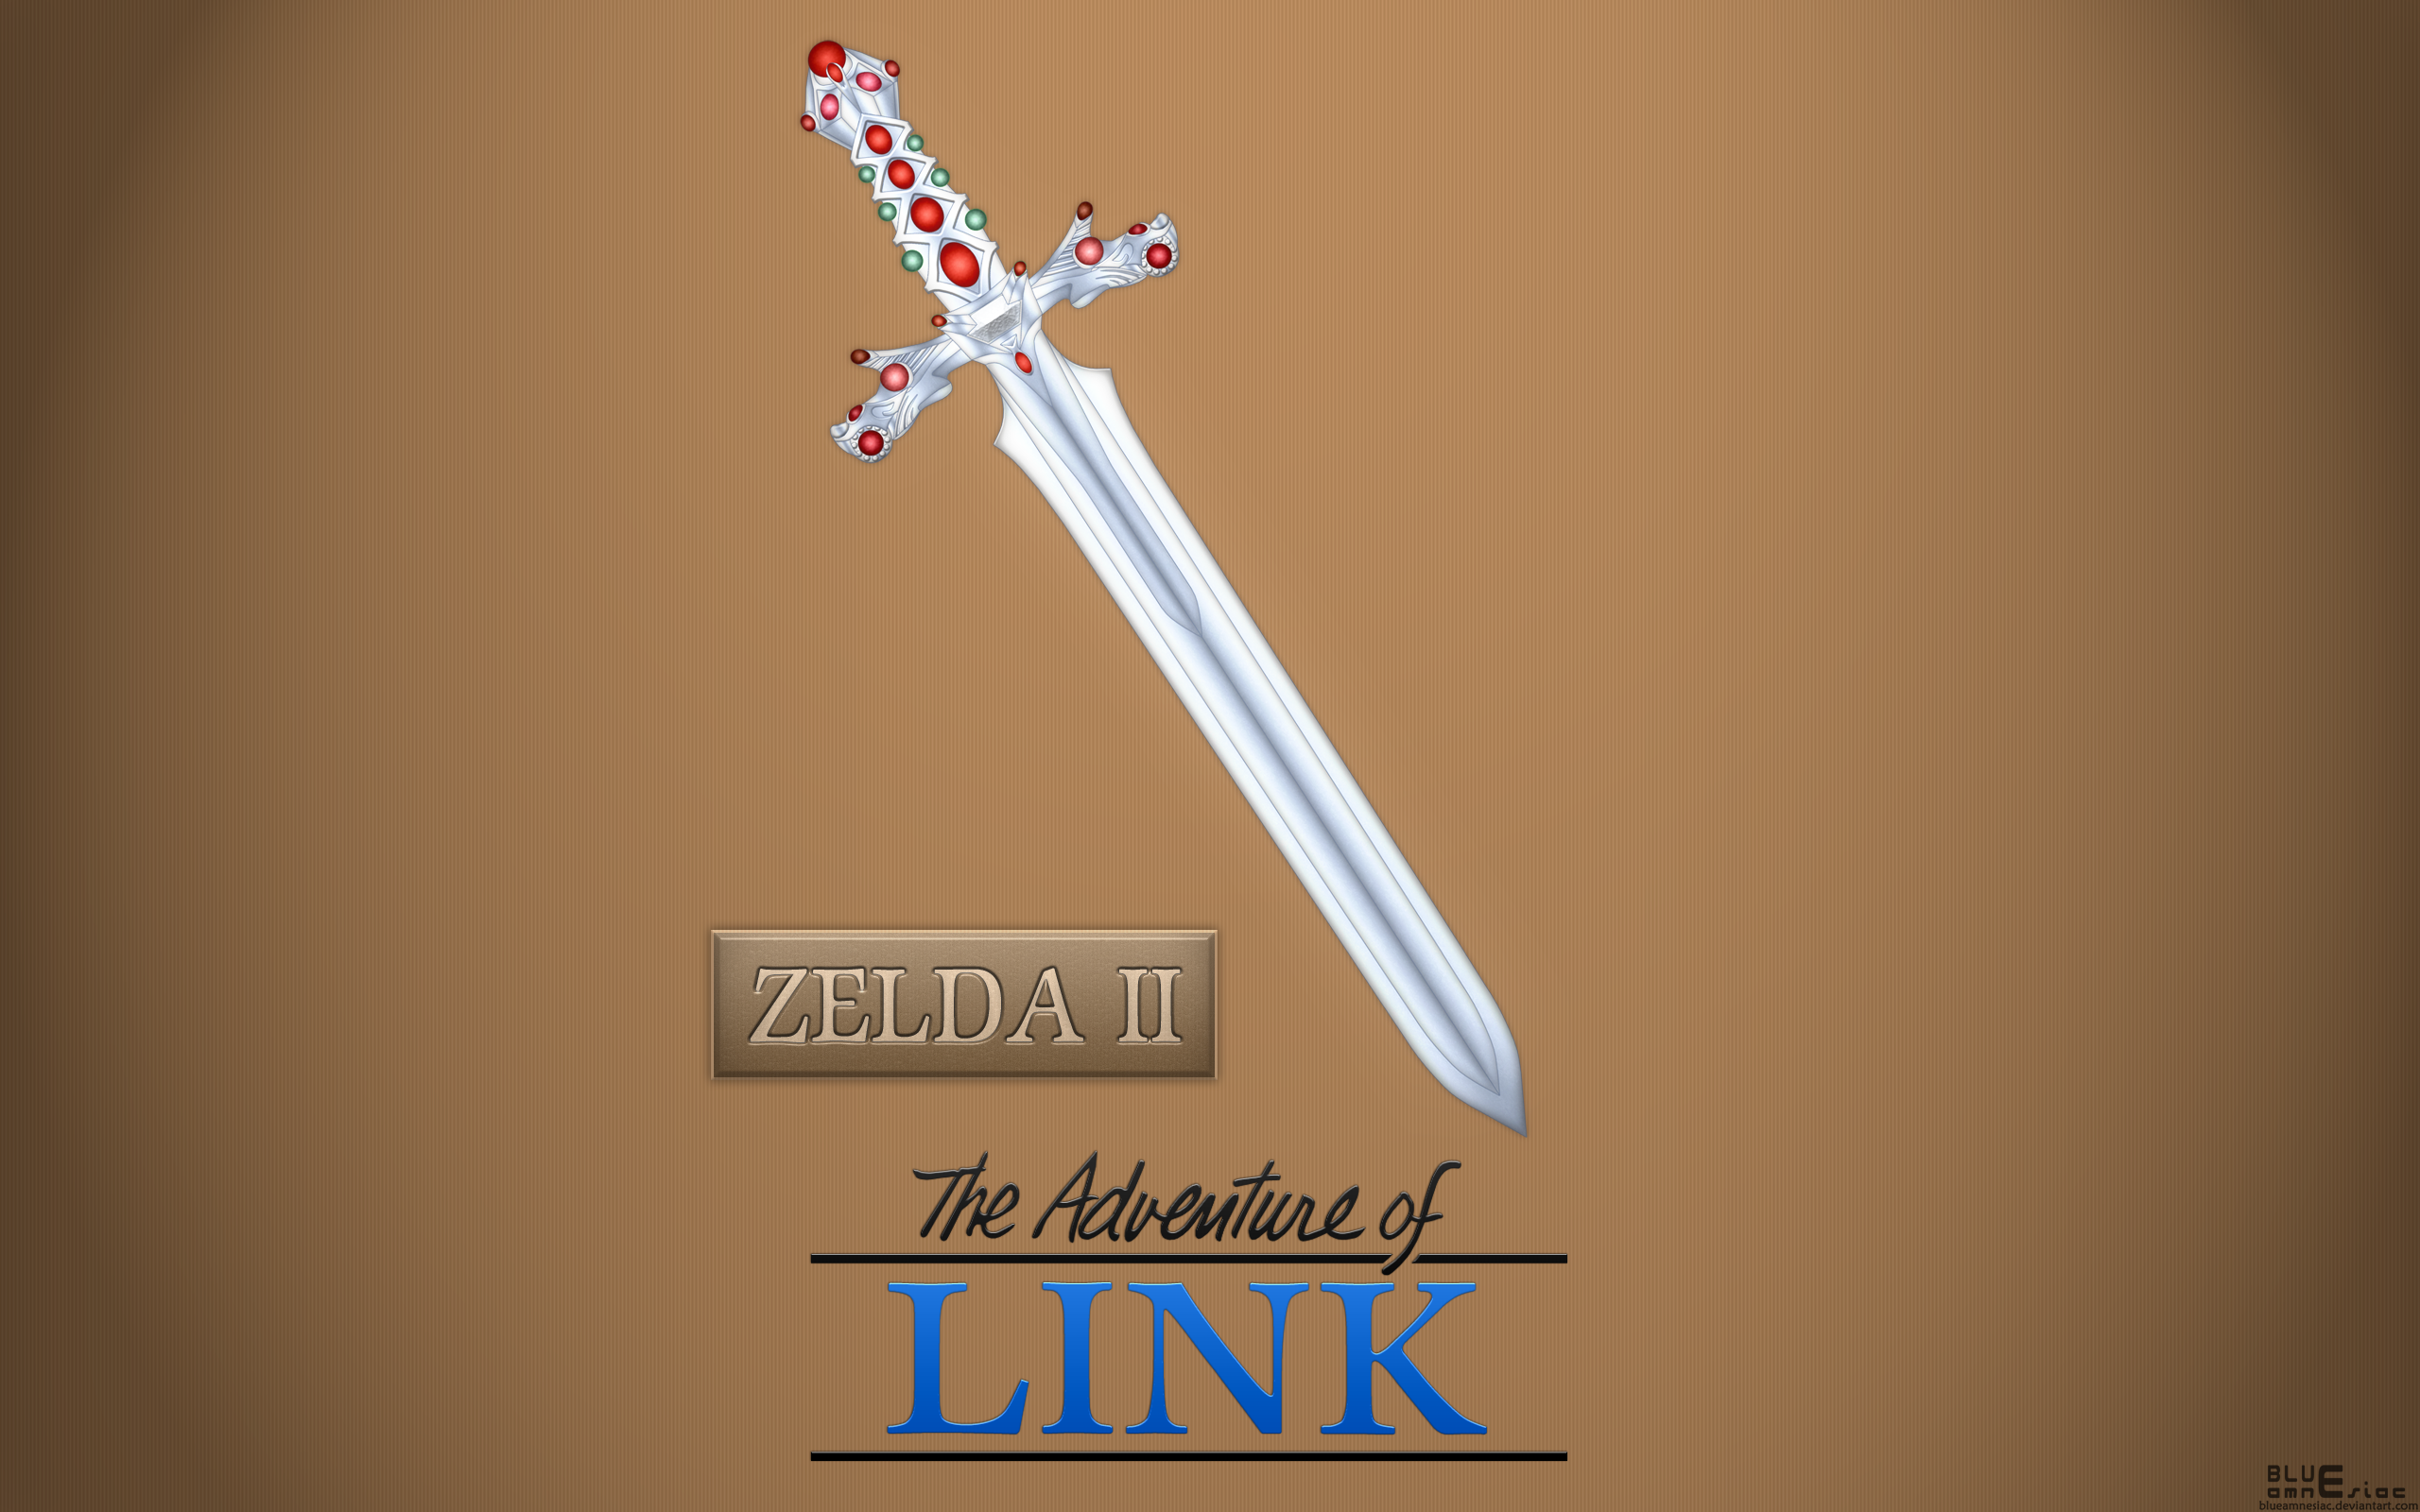 Zelda II: The Adventure Of Link Backgrounds, Compatible - PC, Mobile, Gadgets| 2560x1600 px